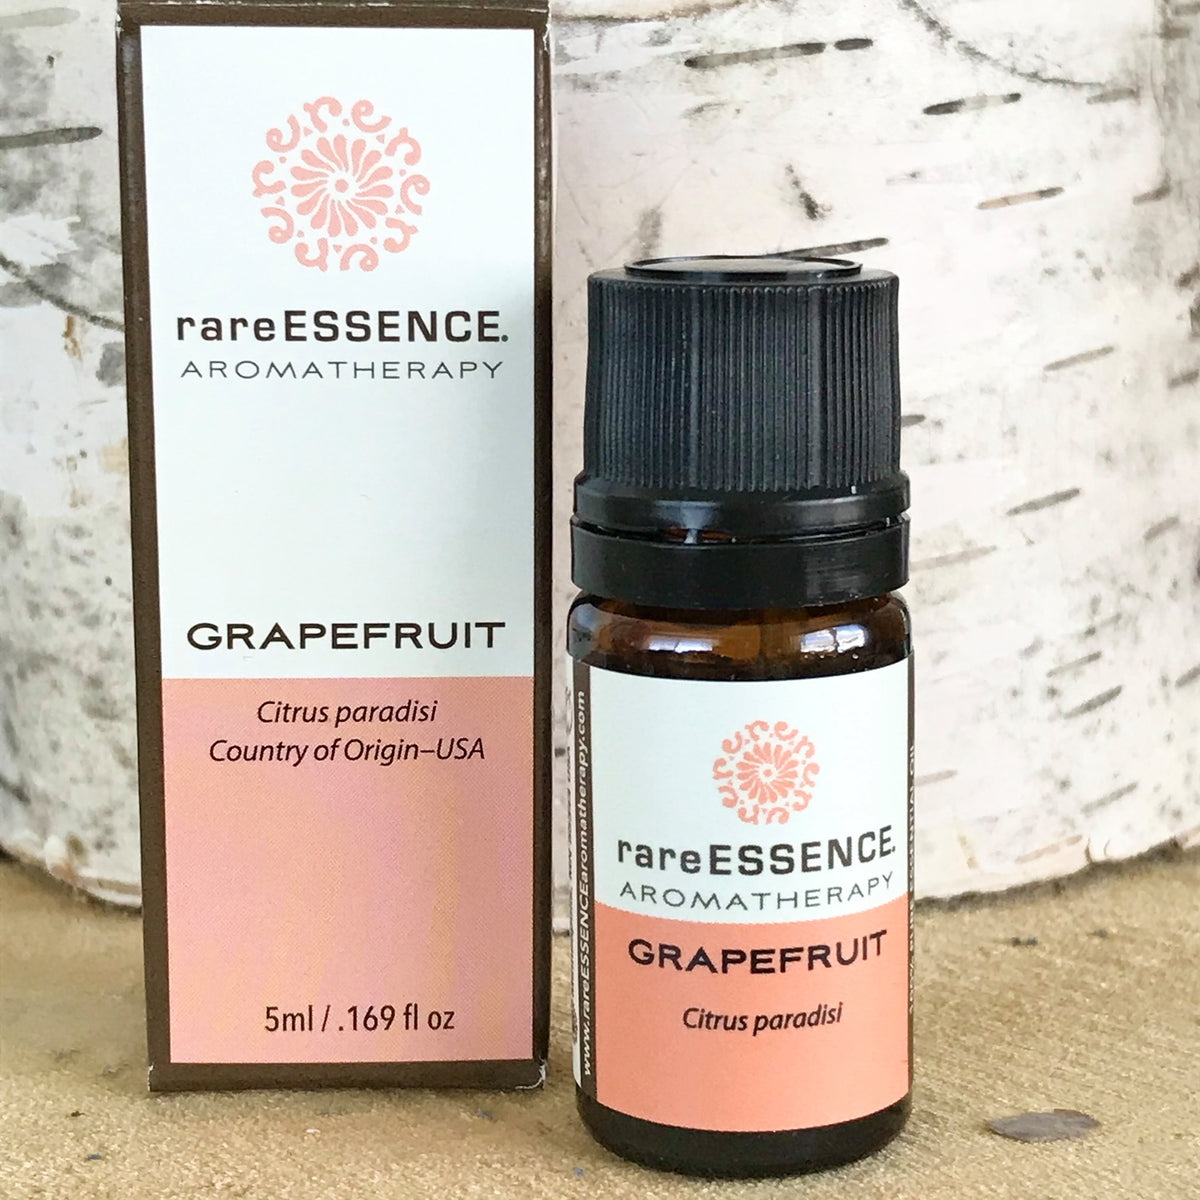 Bottle of grapefruit essential oil from Rare Essence Aromatherapy